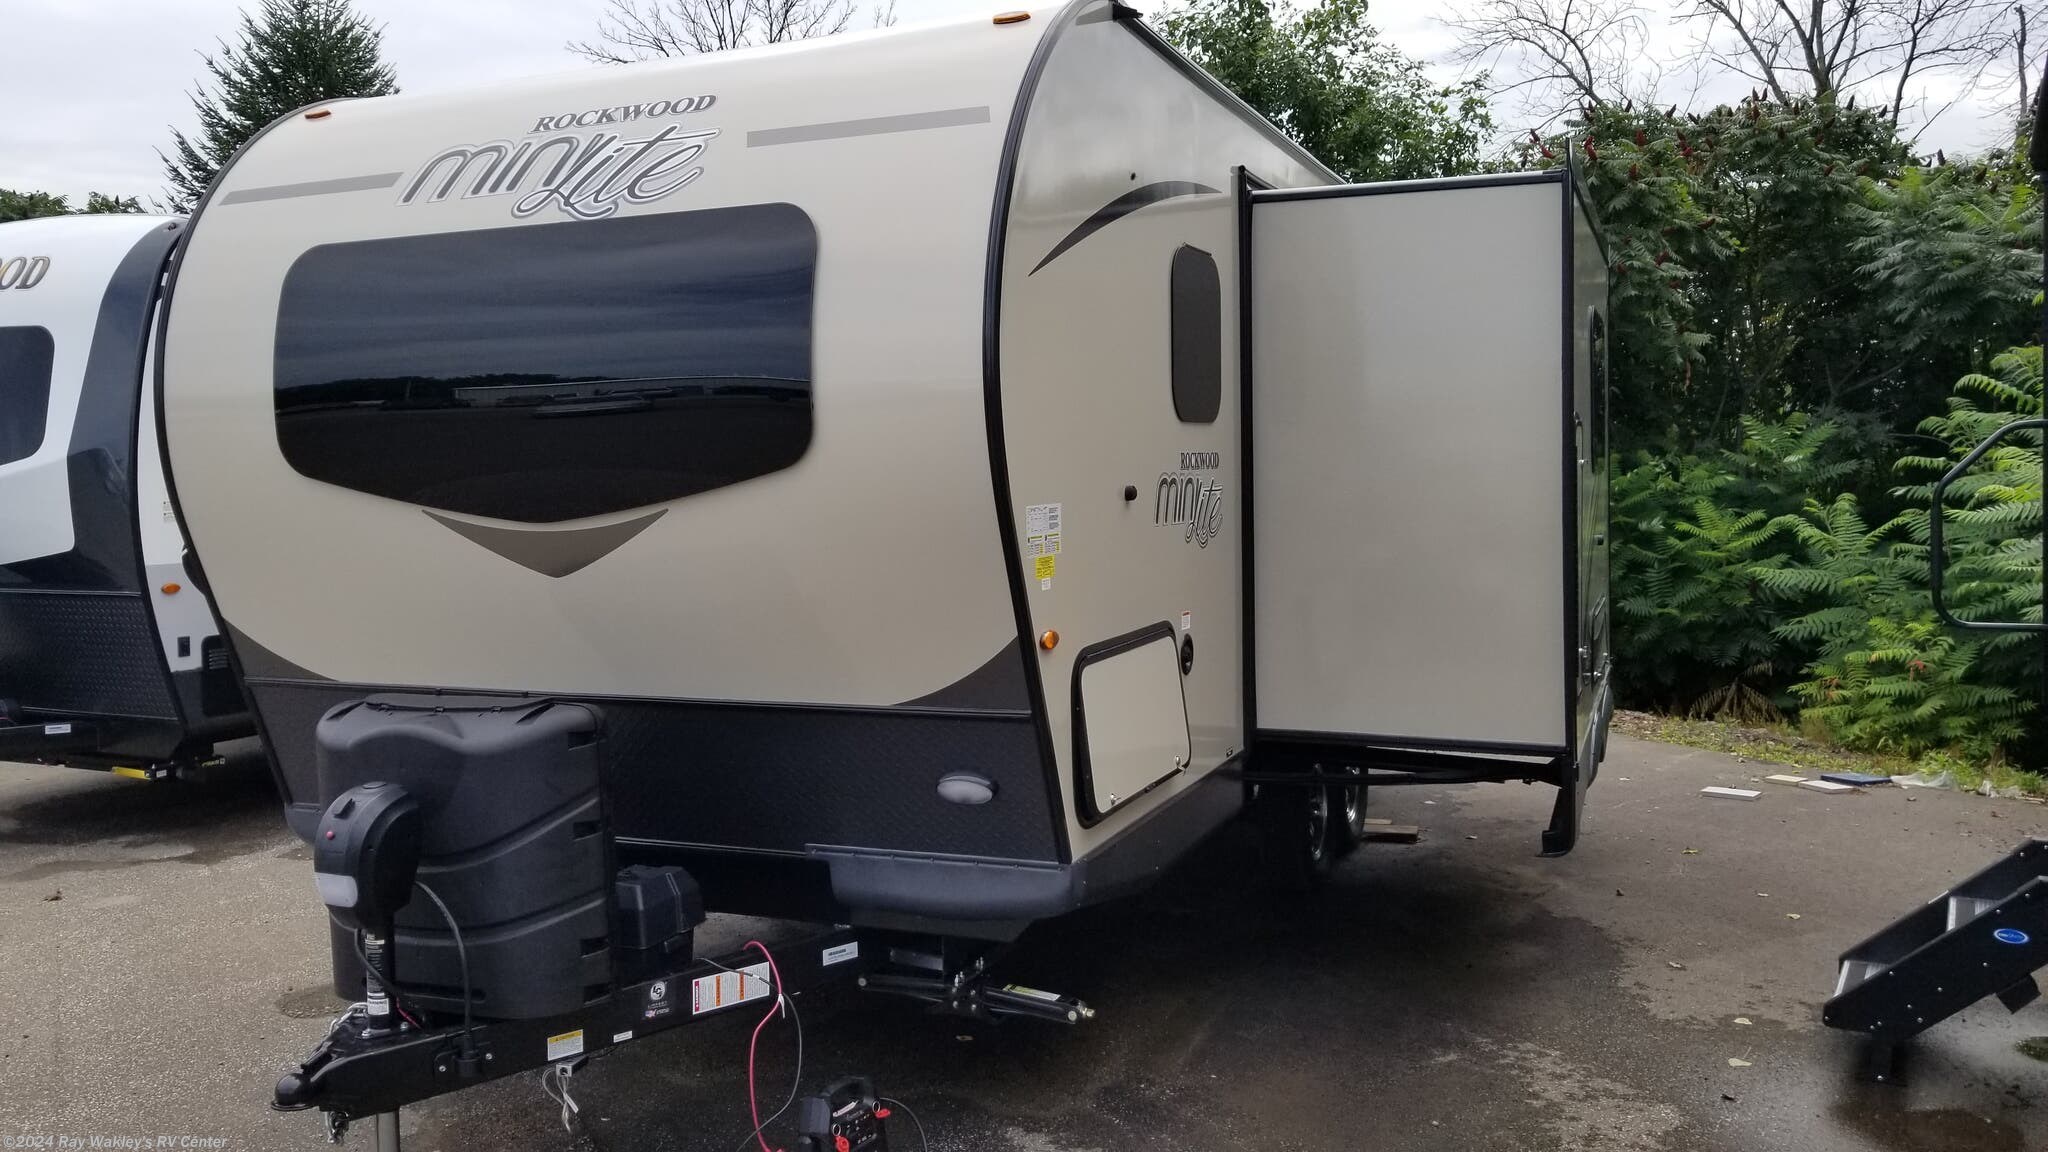 #32431 - 2020 Forest River Rockwood Mini Lite 2104S for sale in North East PA 2020 Forest River Rockwood Mini Lite 2104s